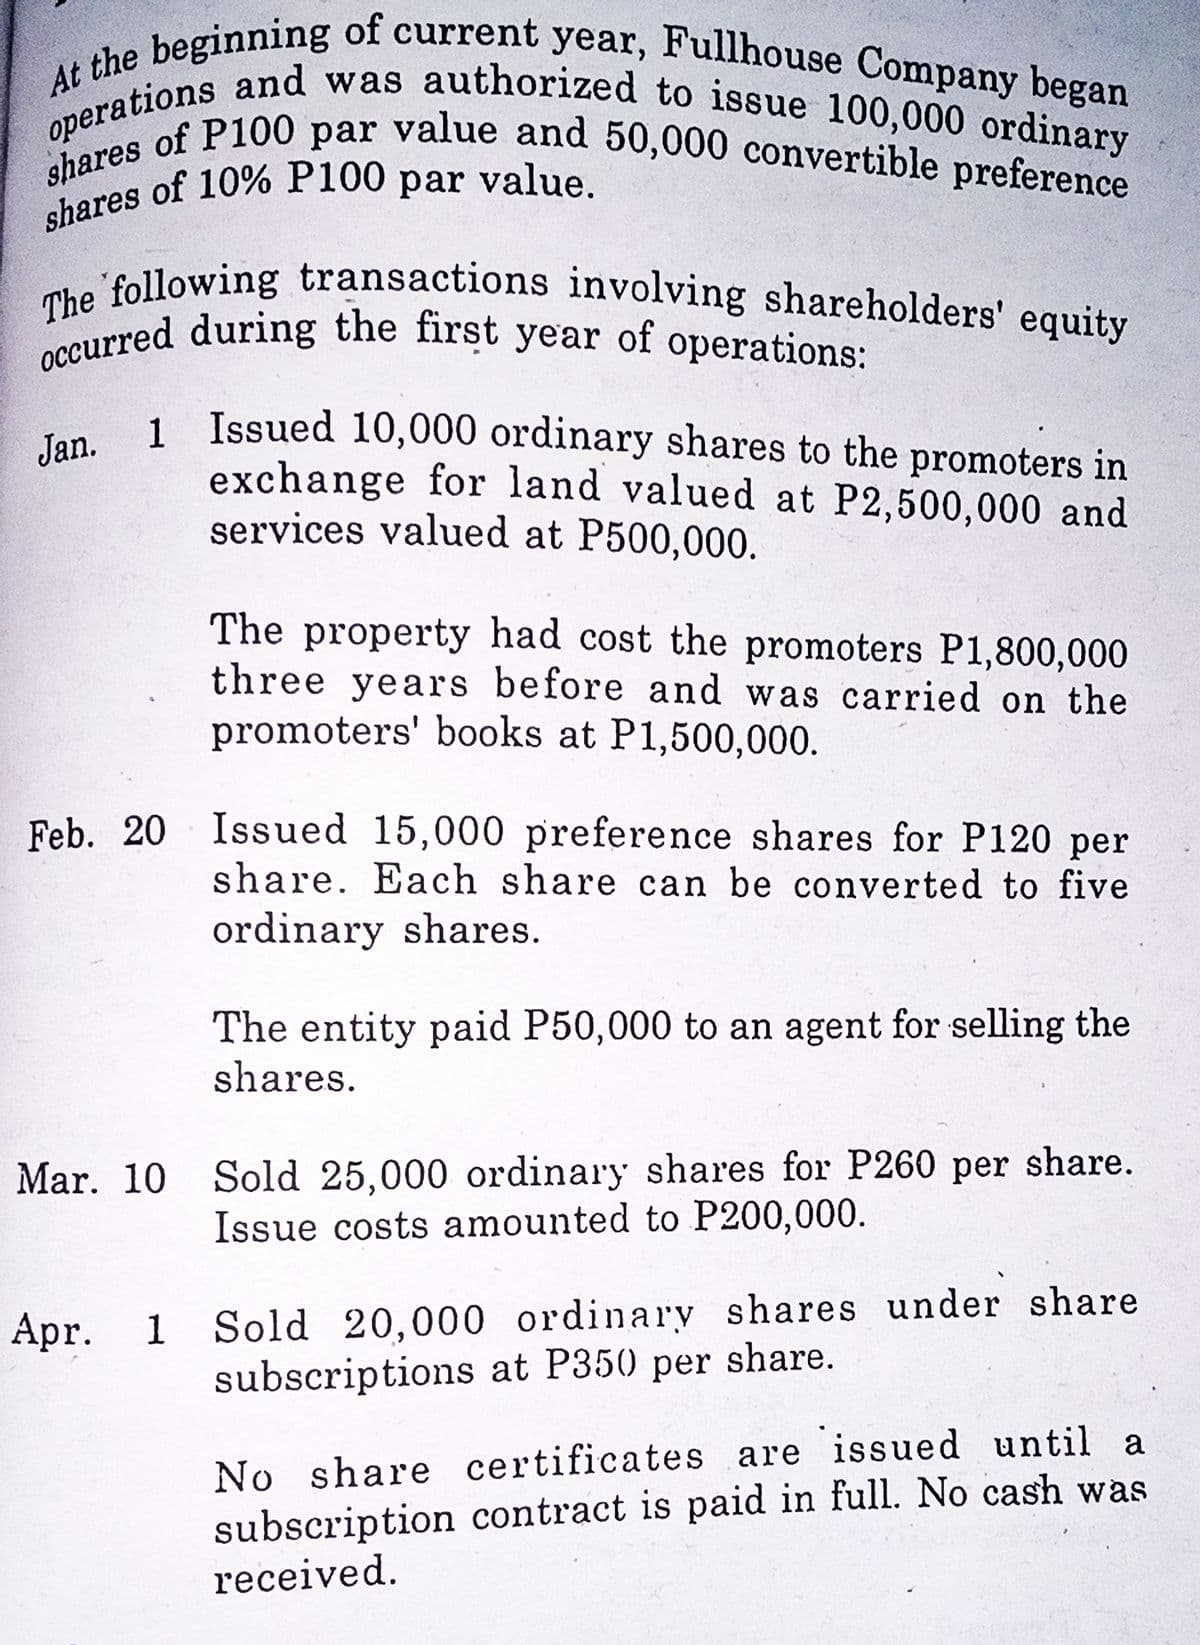 shares of 10% P100 par value.
shares of P100 par value and 50,000 convertible preference
At the beginning of current year, Fullhouse Company began
occurred during the first year of operations:
The following transactions involving shareholders' equity
operations and was authorized to issue 100,000 ordinary
value.
1 Issued 10,000 ordinary shares to the promoters in
exchange for land valued at P2,500,000 and
services valued at P500,000.
Jan.
The property had cost the promoters P1,800,000
three years before and was carried on the
promoters' books at P1,500,000.
Feb. 20 Issued 15,000 preference shares for P120 per
share. Each share can be converted to five
ordinary shares.
The entity paid P50,000 to an agent for selling the
shares.
Mar. 10 Sold 25,000 ordinary shares for P260 per share.
Issue costs amounted to P200,000.
1 Sold 20,000 ordinary shares under share
subscriptions at P350 per share.
Apr.
No share certificates are issued until a
subscription contract is paid in full. No cash was
received.
